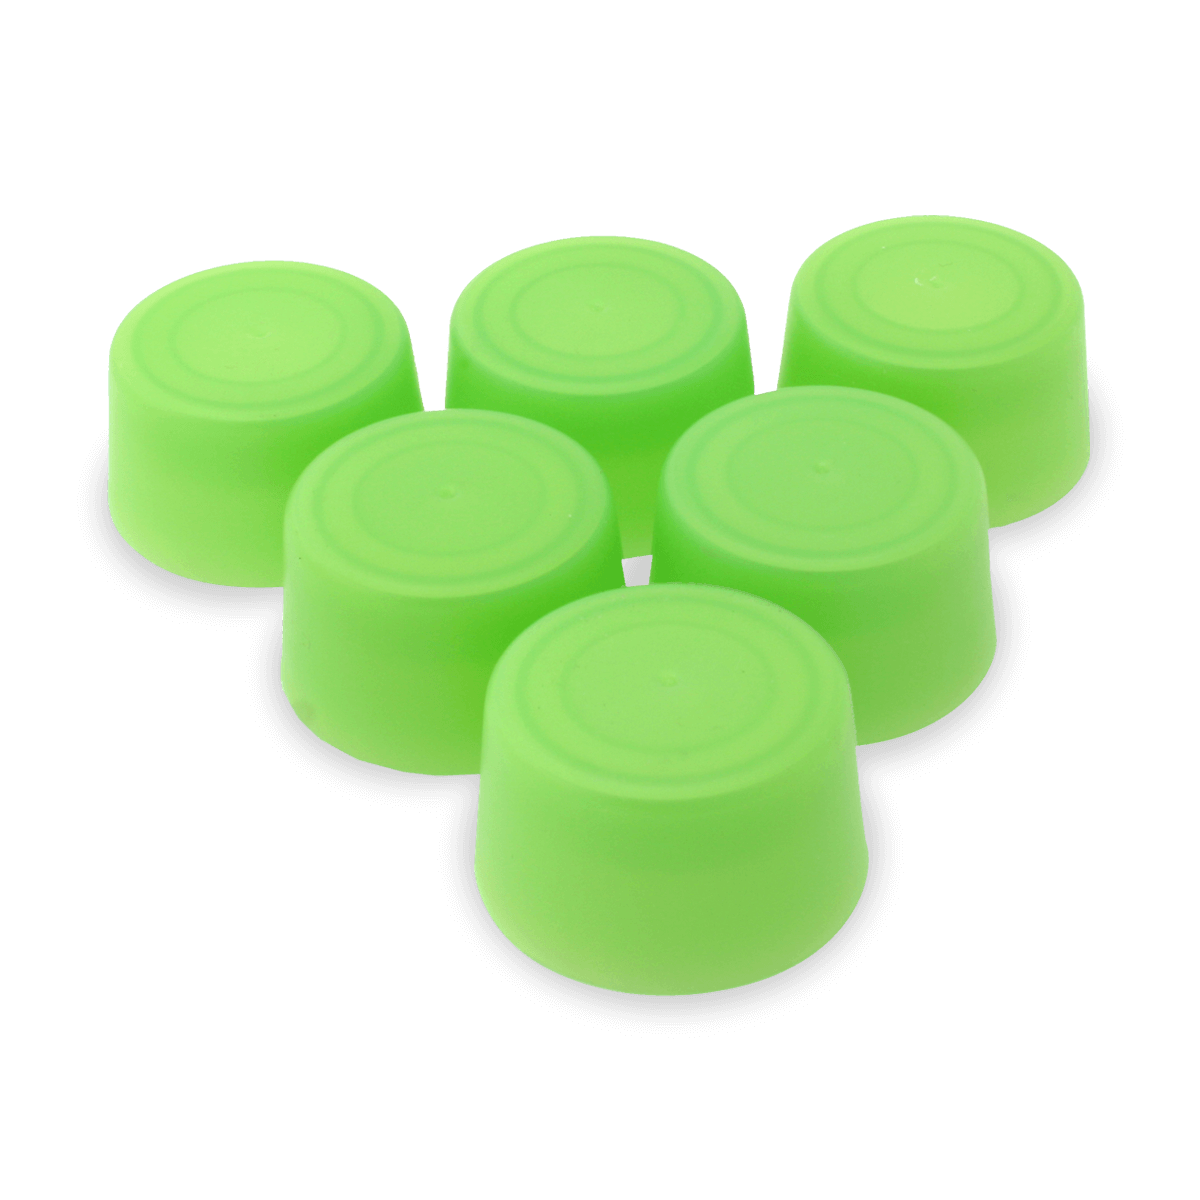 Replacement Water Bottle Caps (6 Pack) For 18Oz. Glass Bottles Green Aquasana